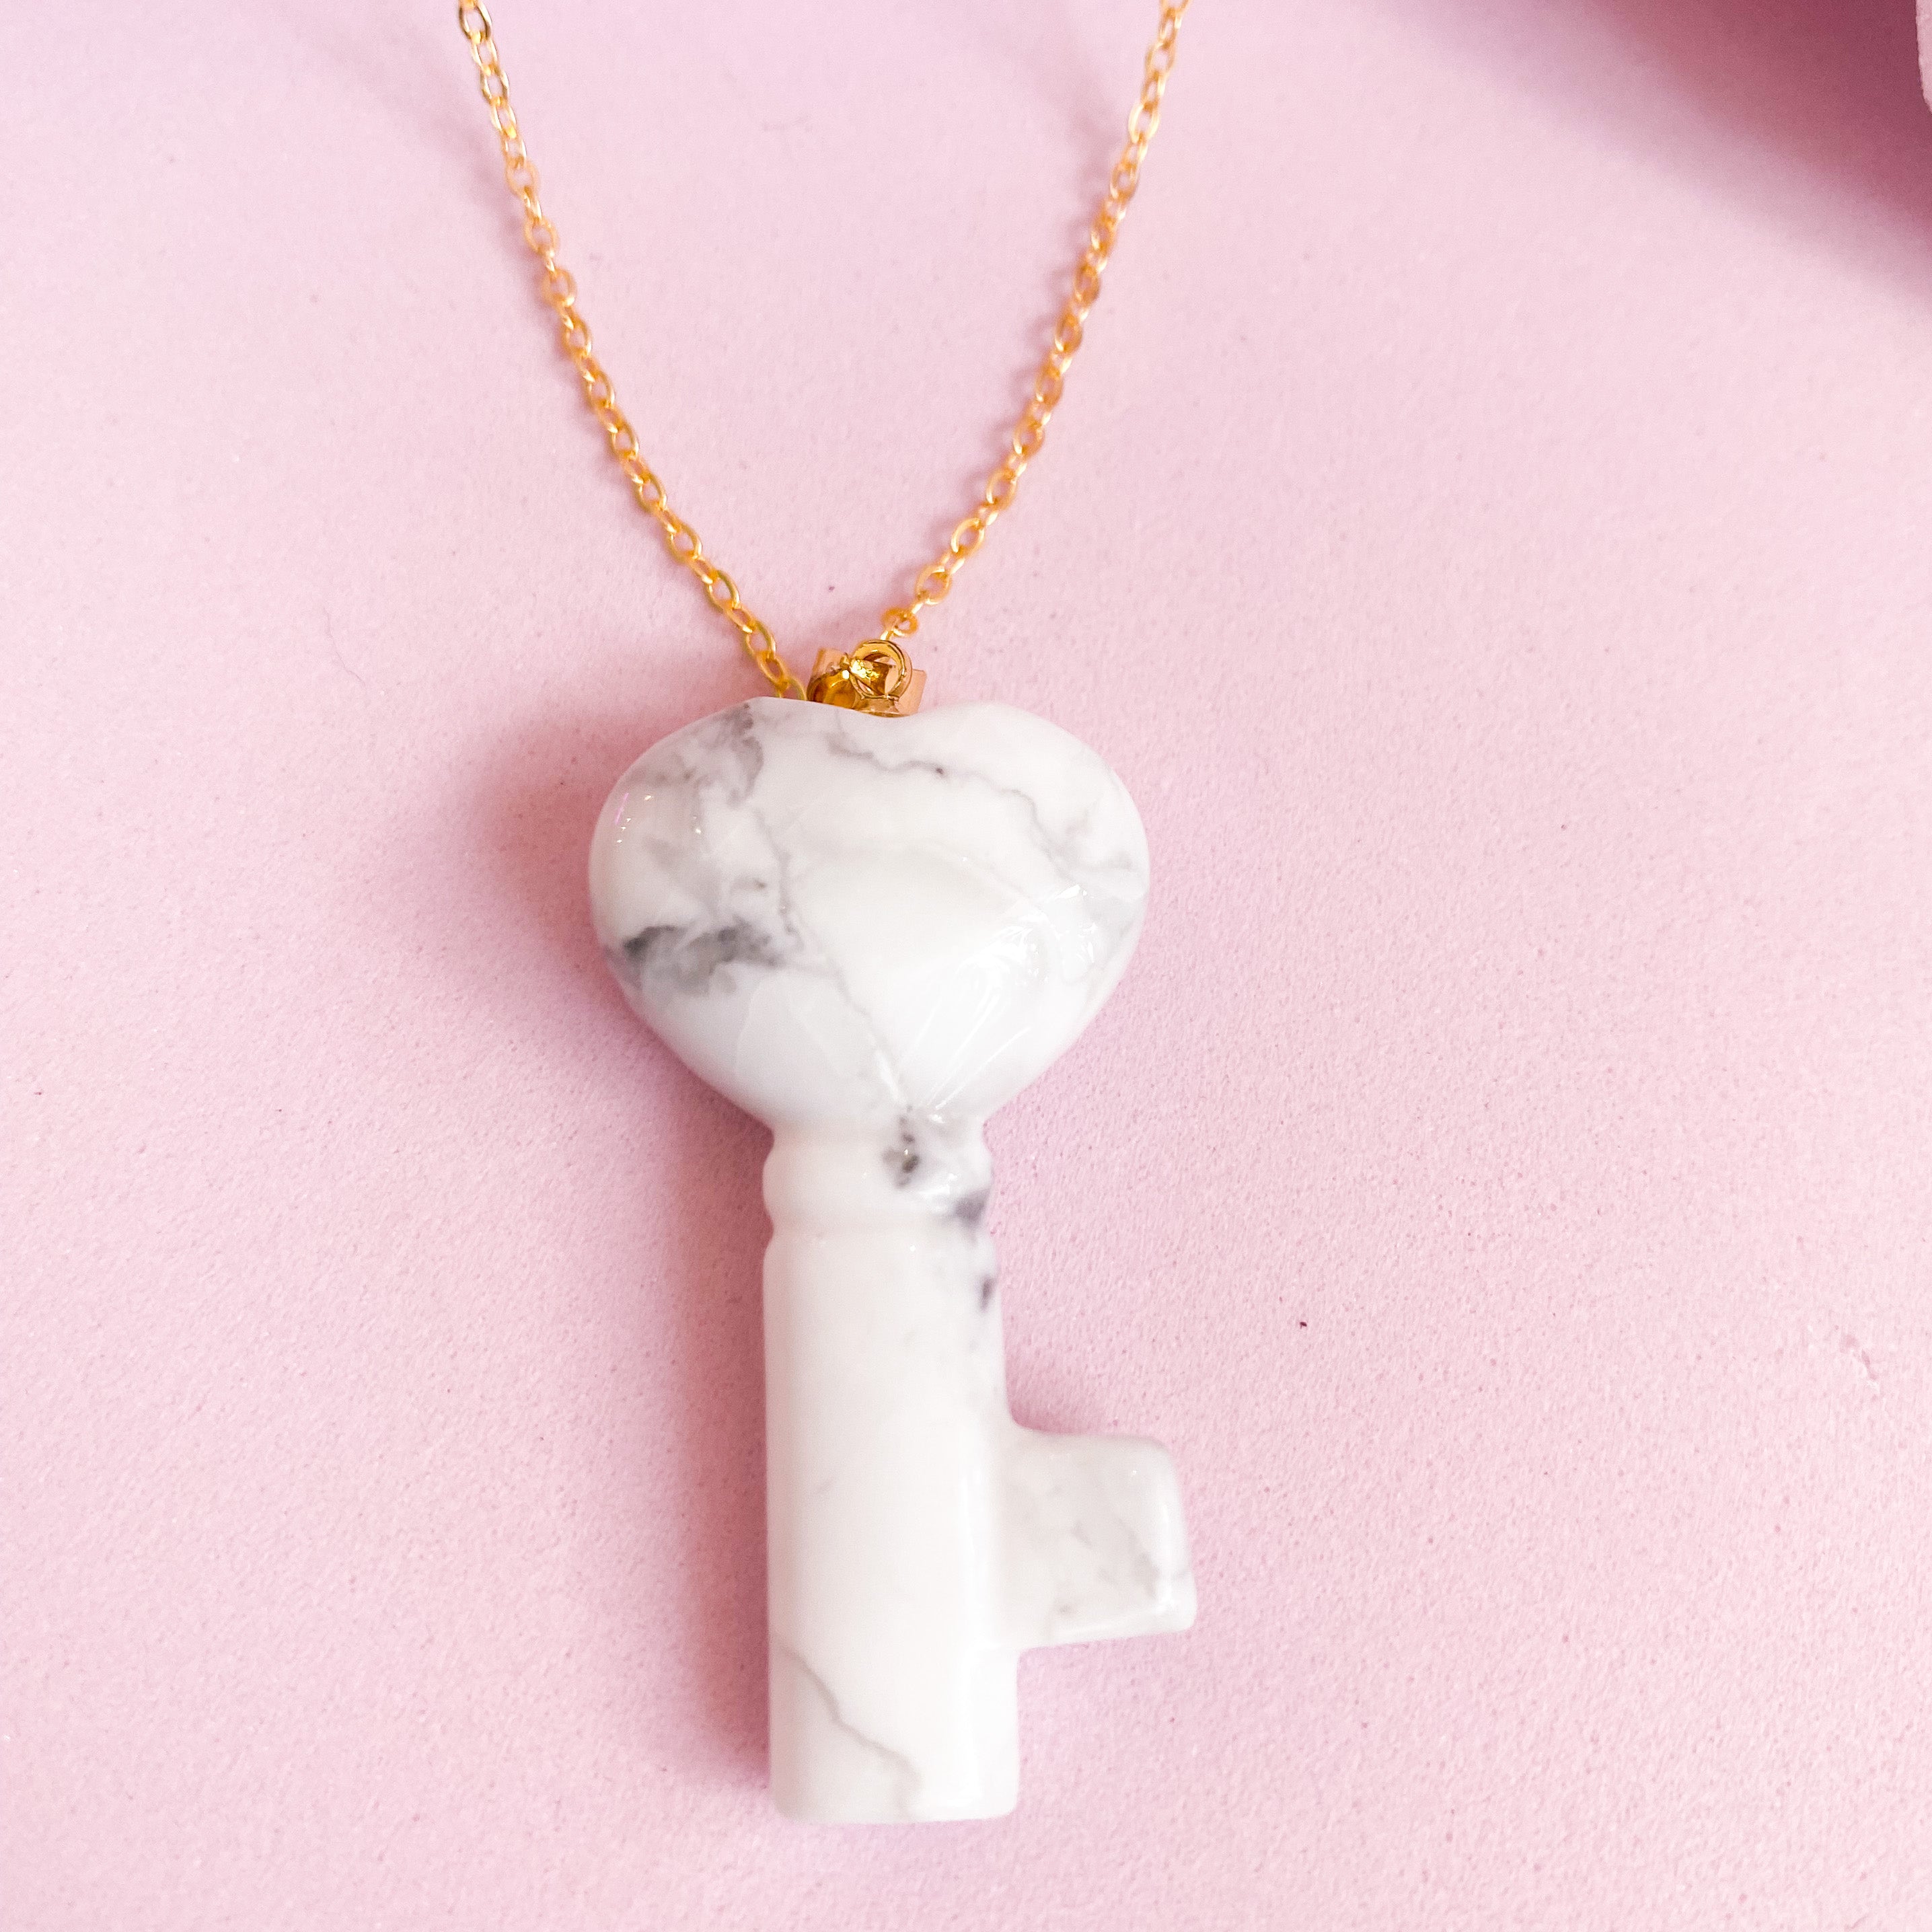 Howlite Crystal Key Necklace on Gold Chain